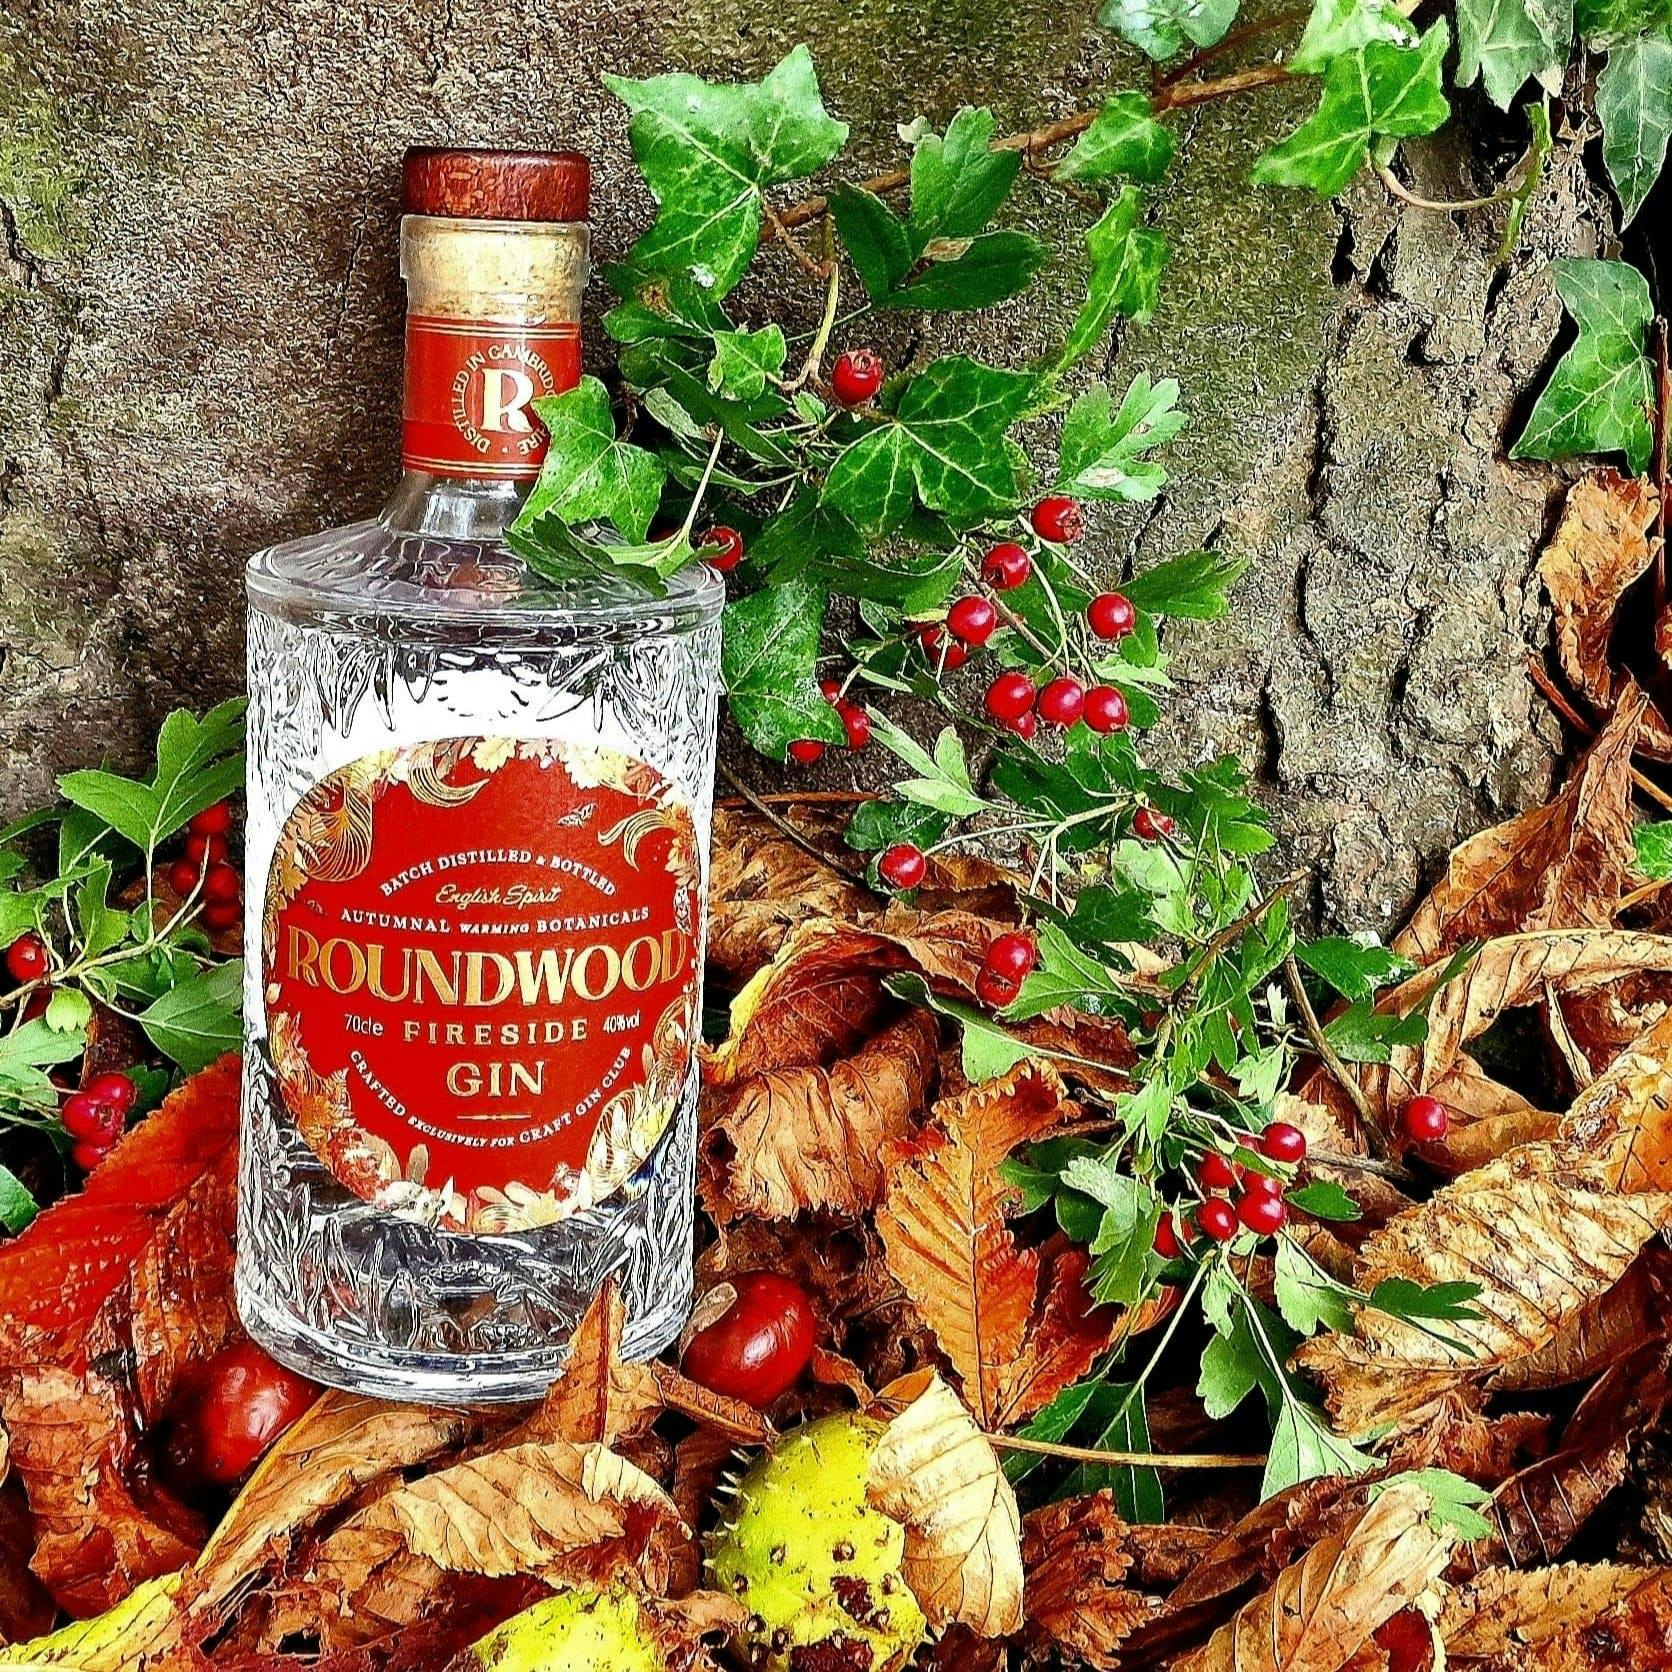 Roundwood Fireside Gin against a tree with leaves and berries